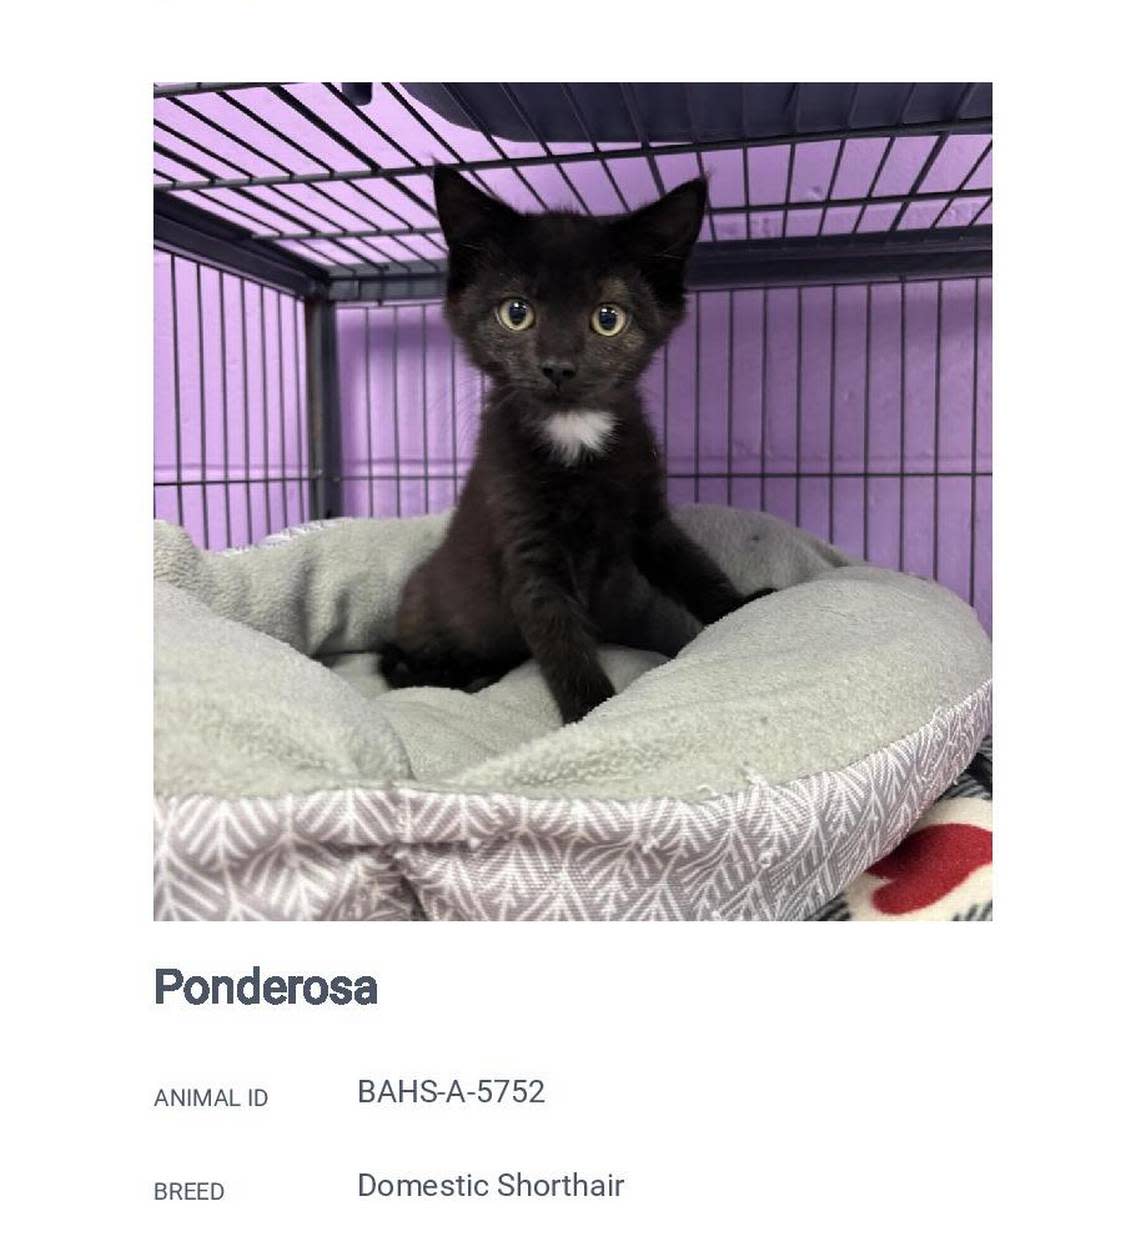 Ponderosa, shown here in a screenshot from the Belleville Area Humane Society’s website, is available for adoption.